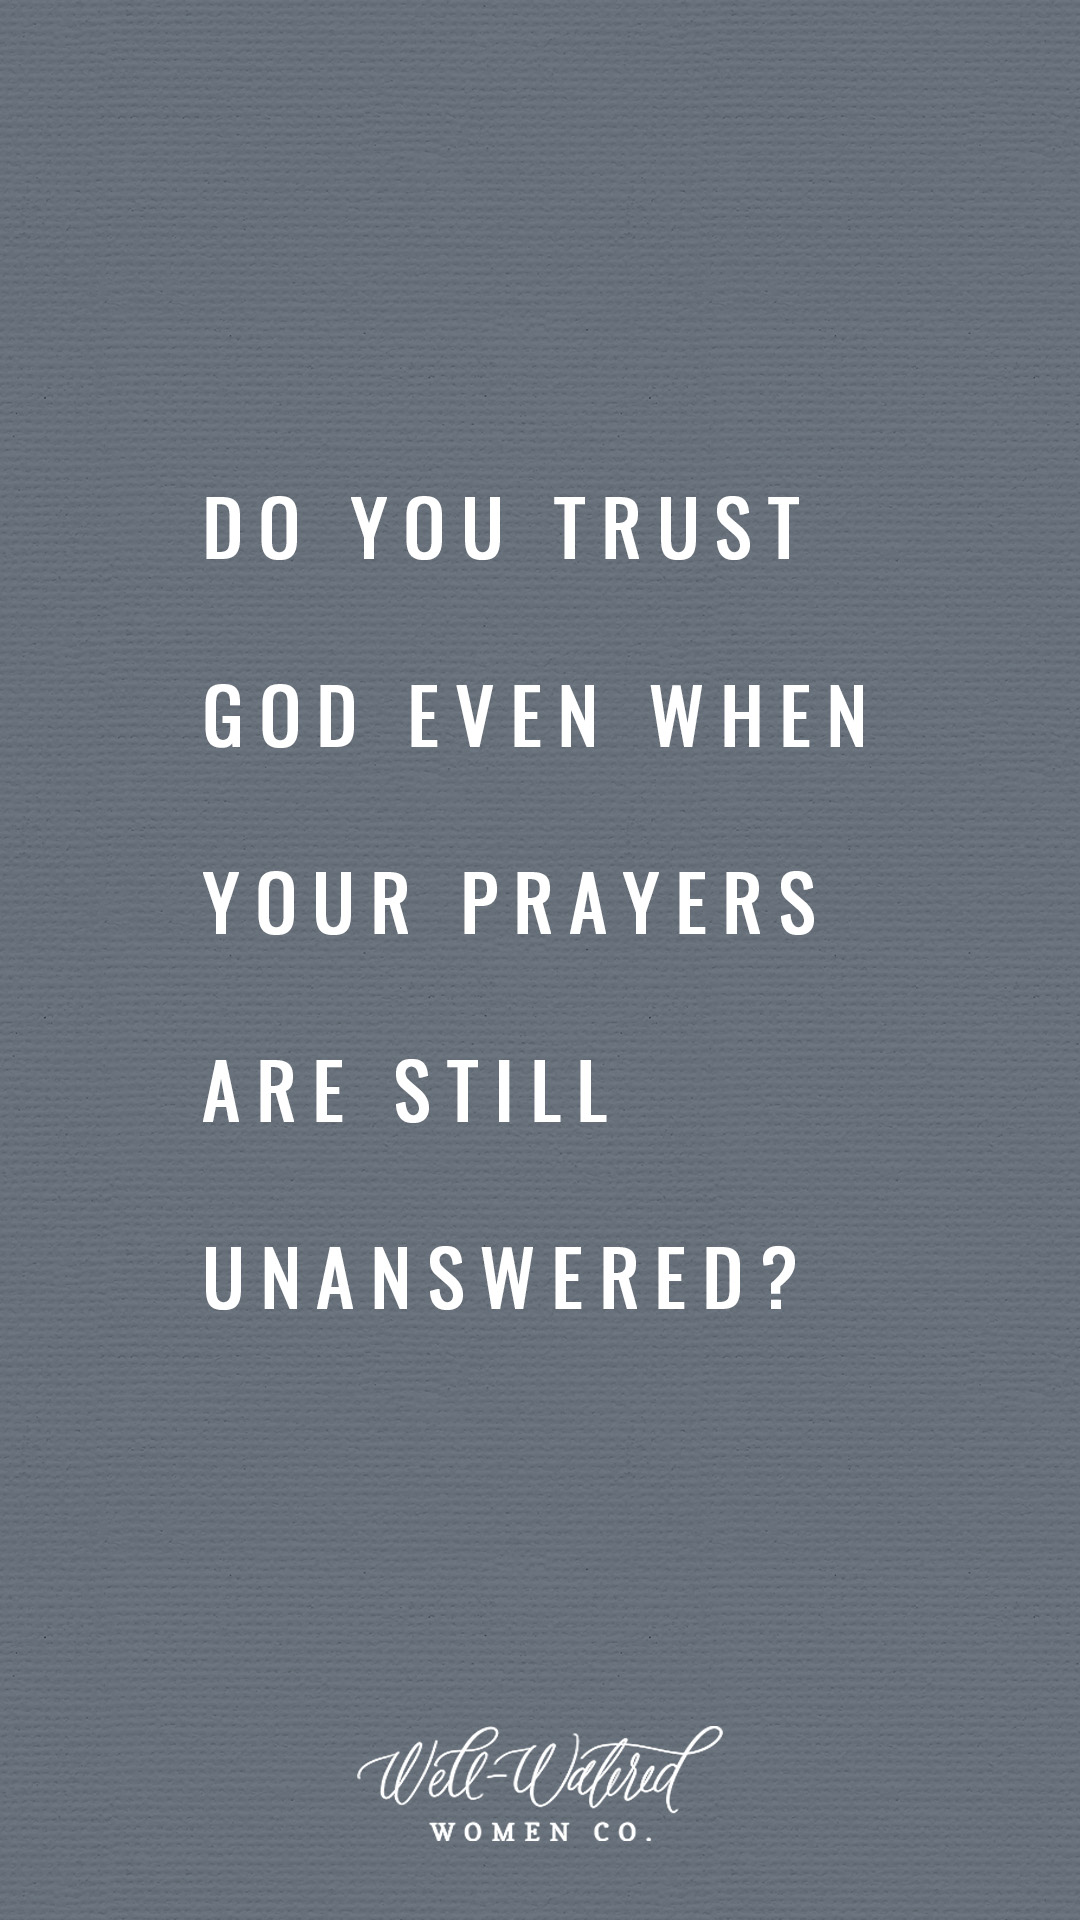 Well Watered Women Blog | Do you trust God when your prayers are still unanswered?